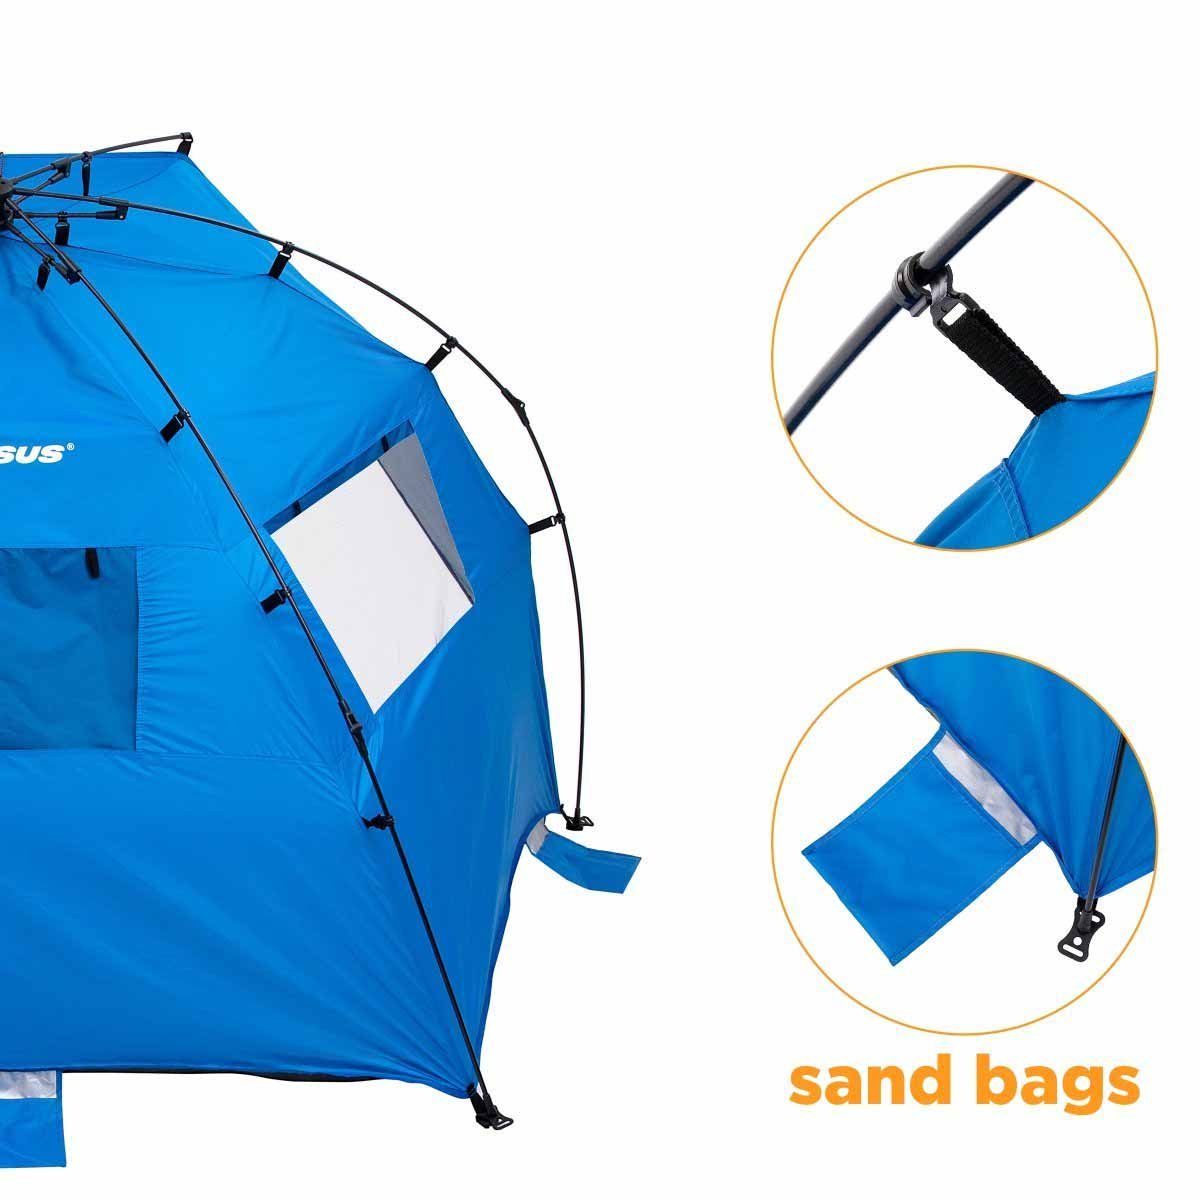 4 Person Large Easy Up Beach Tent Sun Shade Shelter is equipped with sand bags and is easily opened with zipper locks